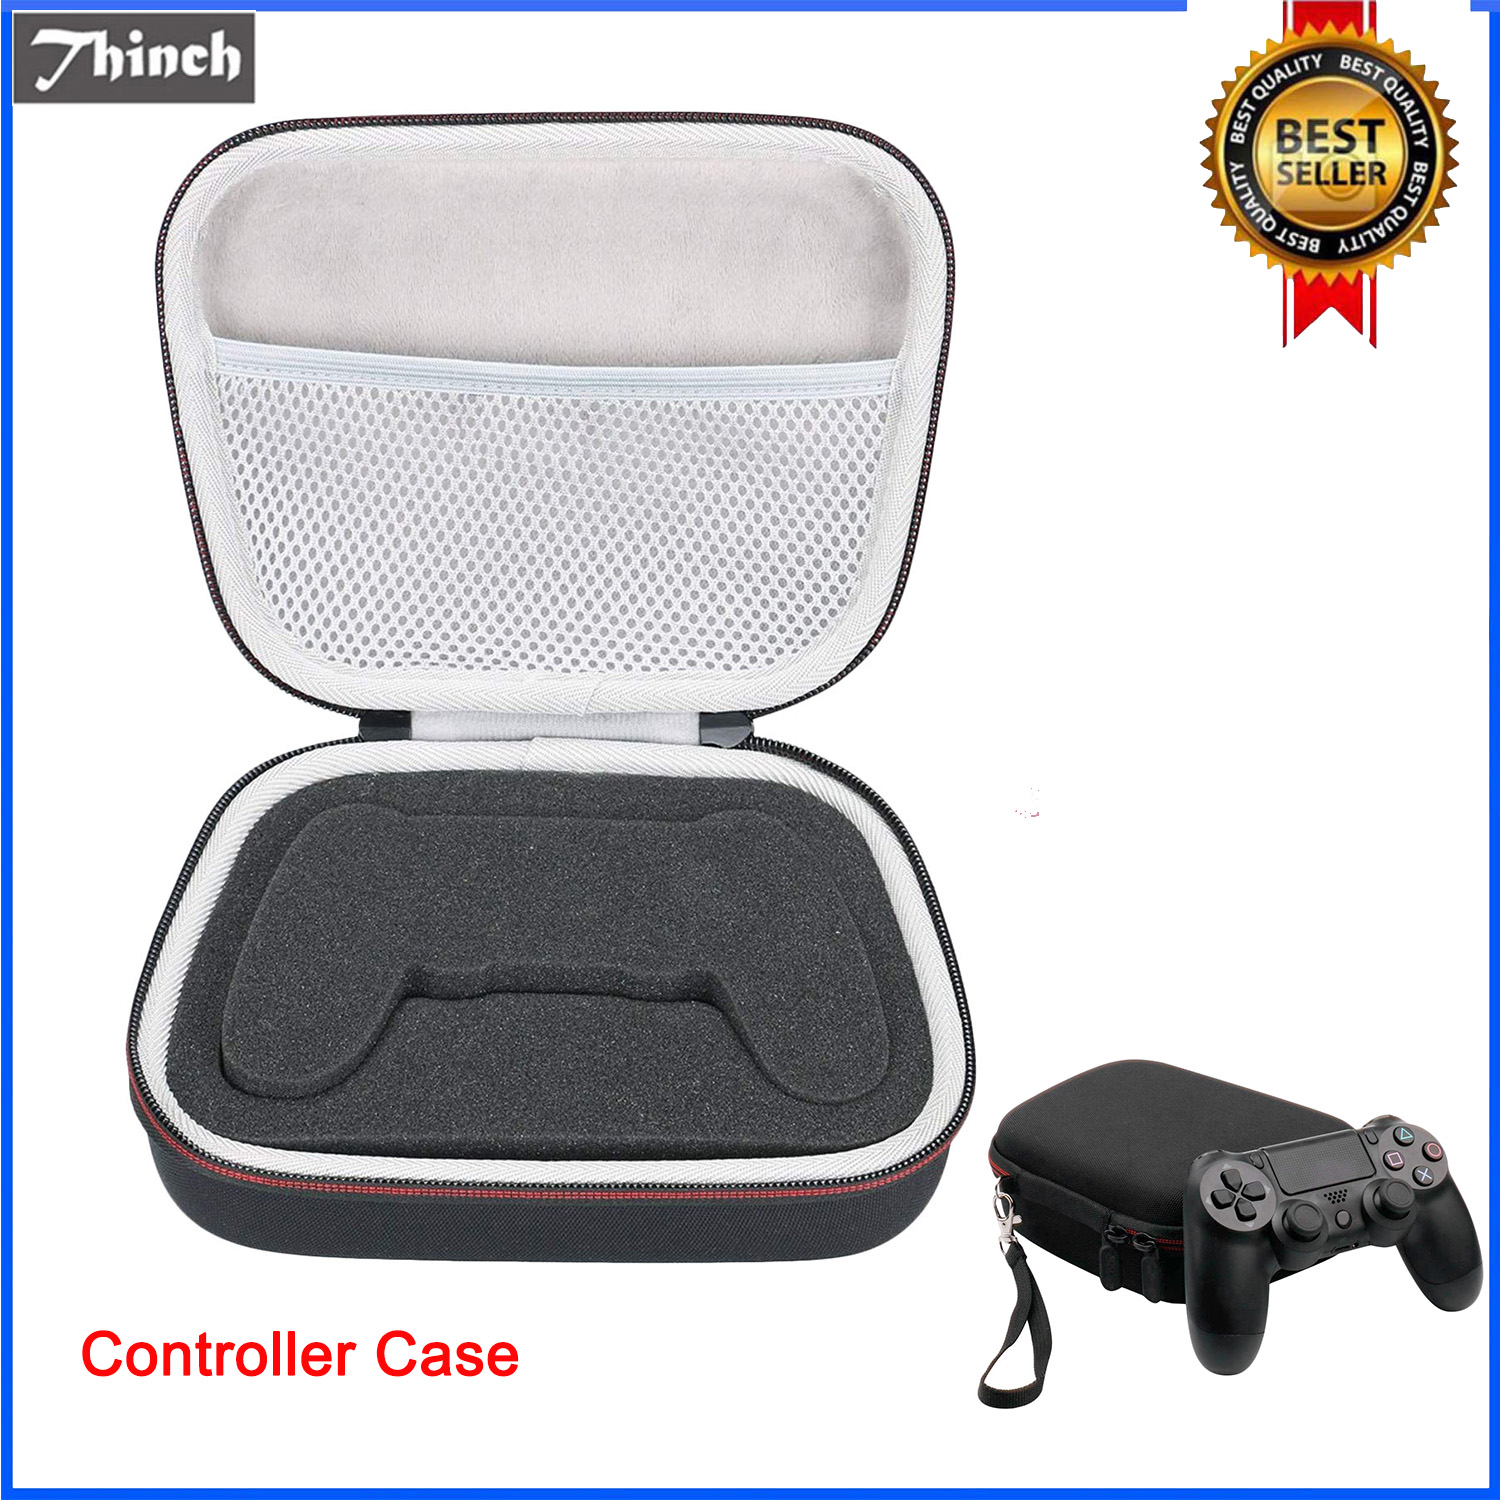 playstation carrying case with tv